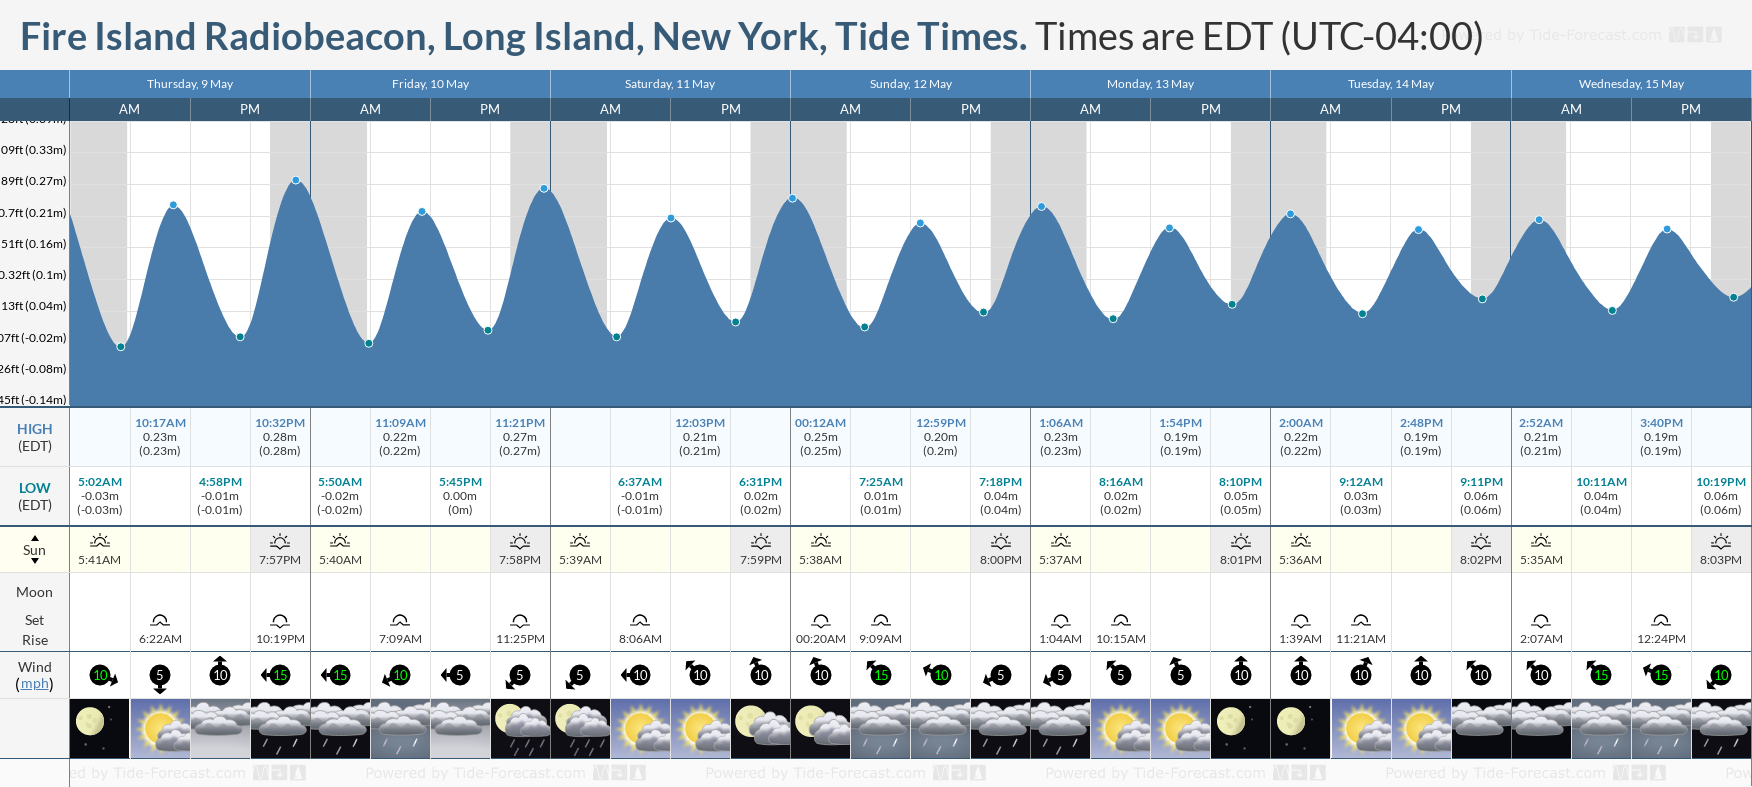 Fire Island Radiobeacon, Long Island, New York Tide Chart including high and low tide tide times for the next 7 days